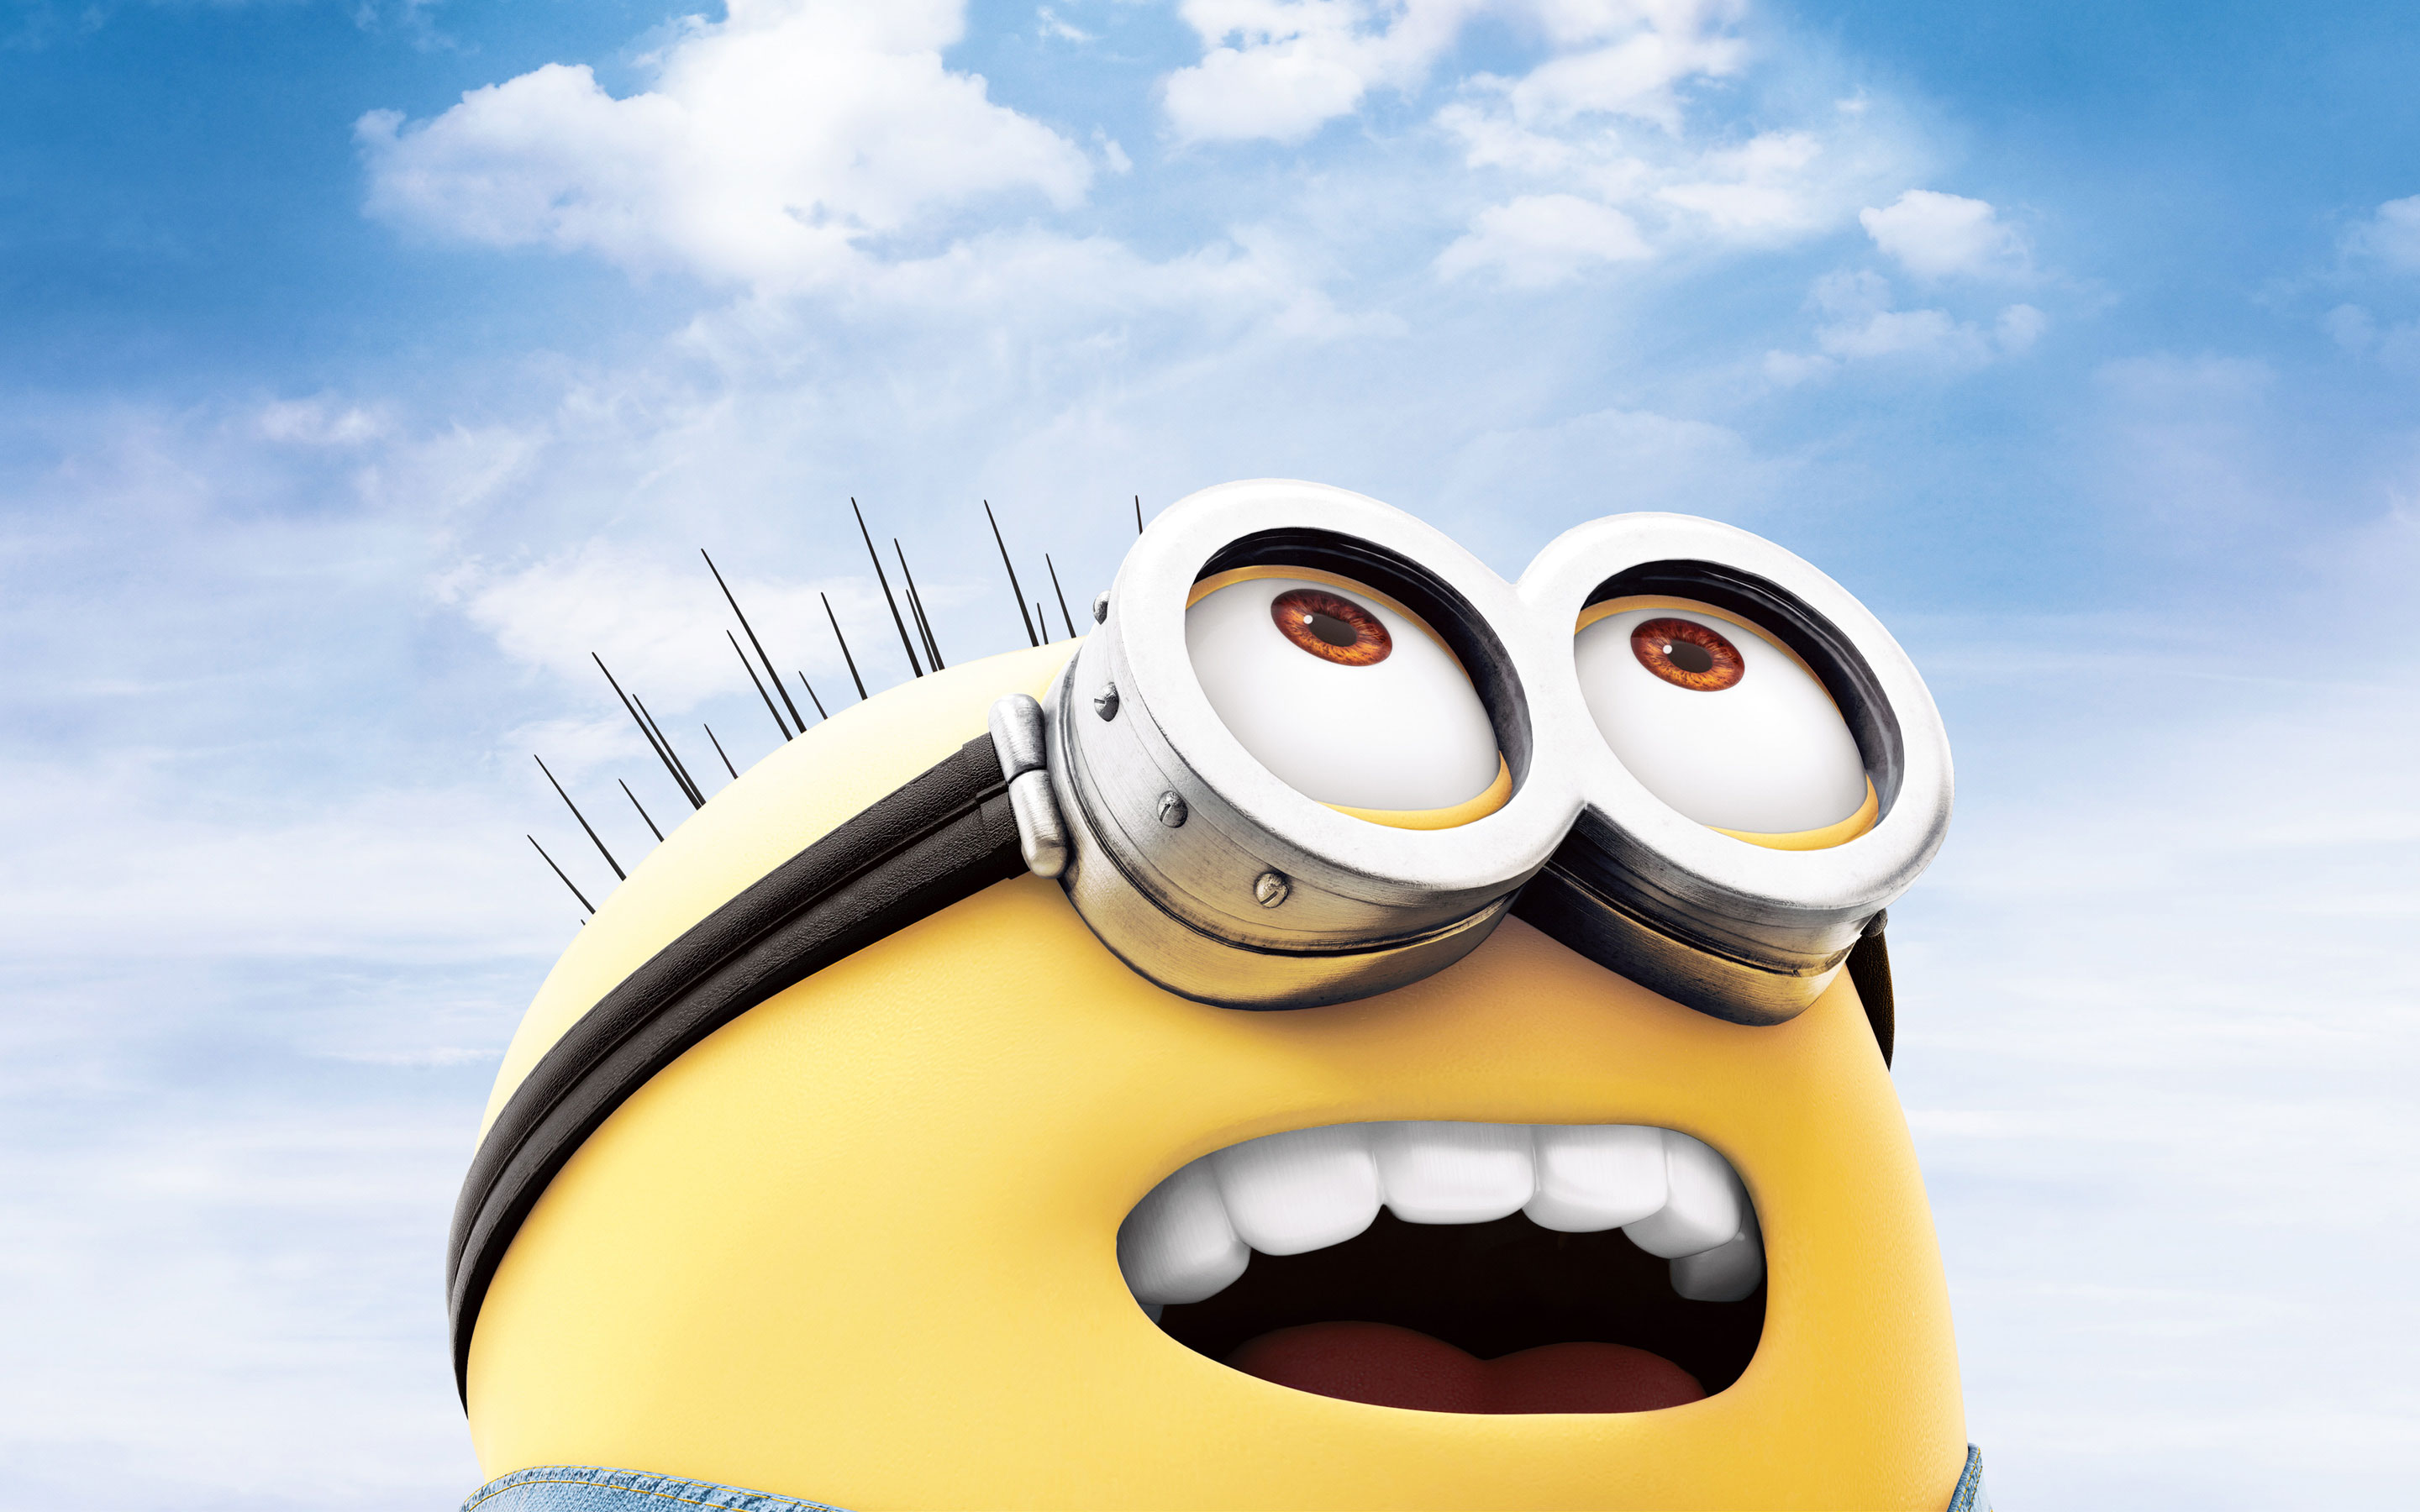 Minion Despicable Me Cute Image Amp Pictures Becuo